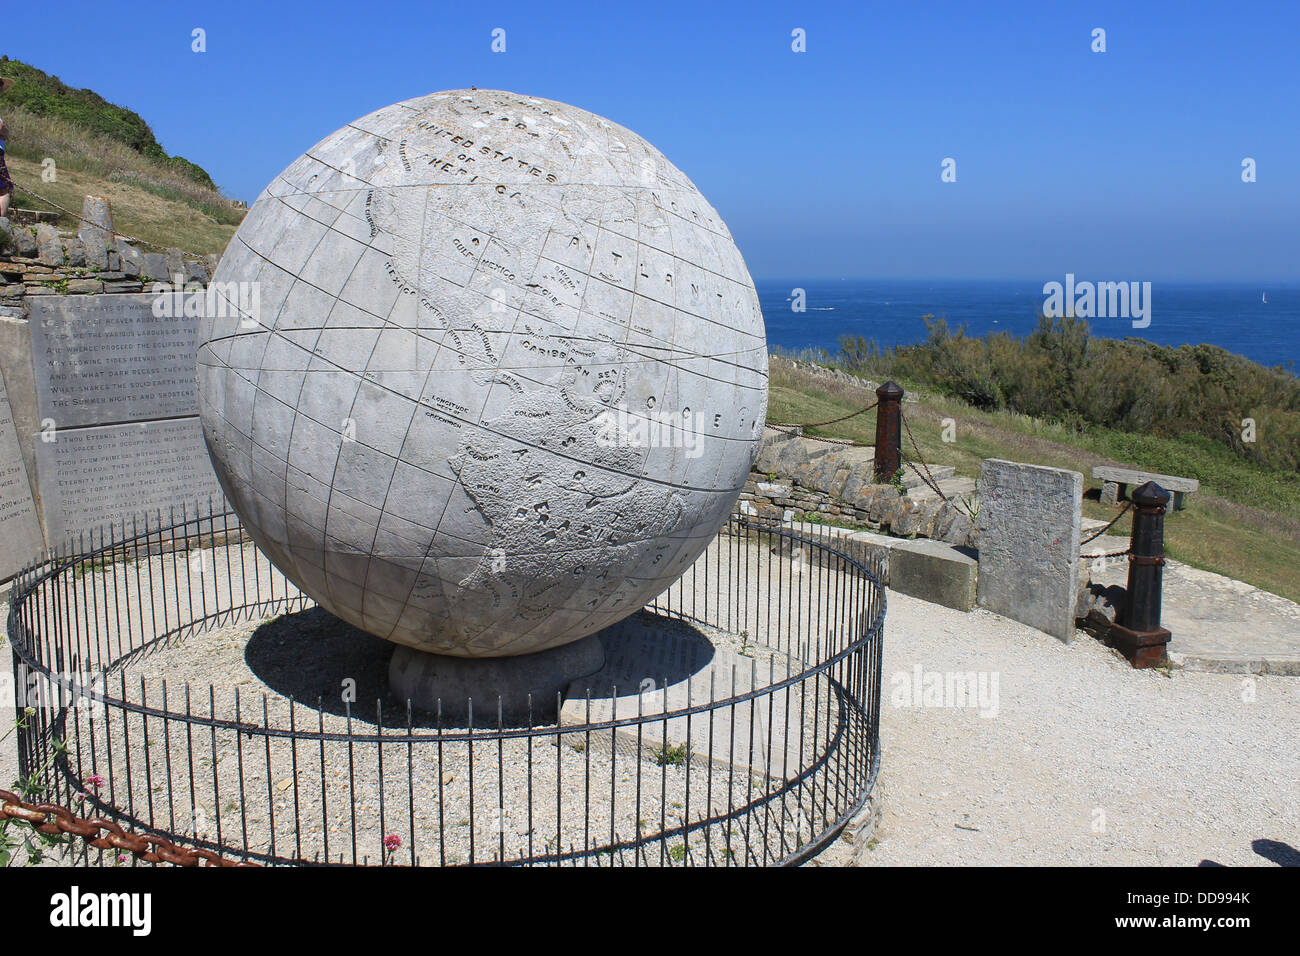 The Globe, an enormous stone-carved globe, at Durlston Head, Durlston Country Park, Dorset, UK on the South West Coast Path Stock Photo